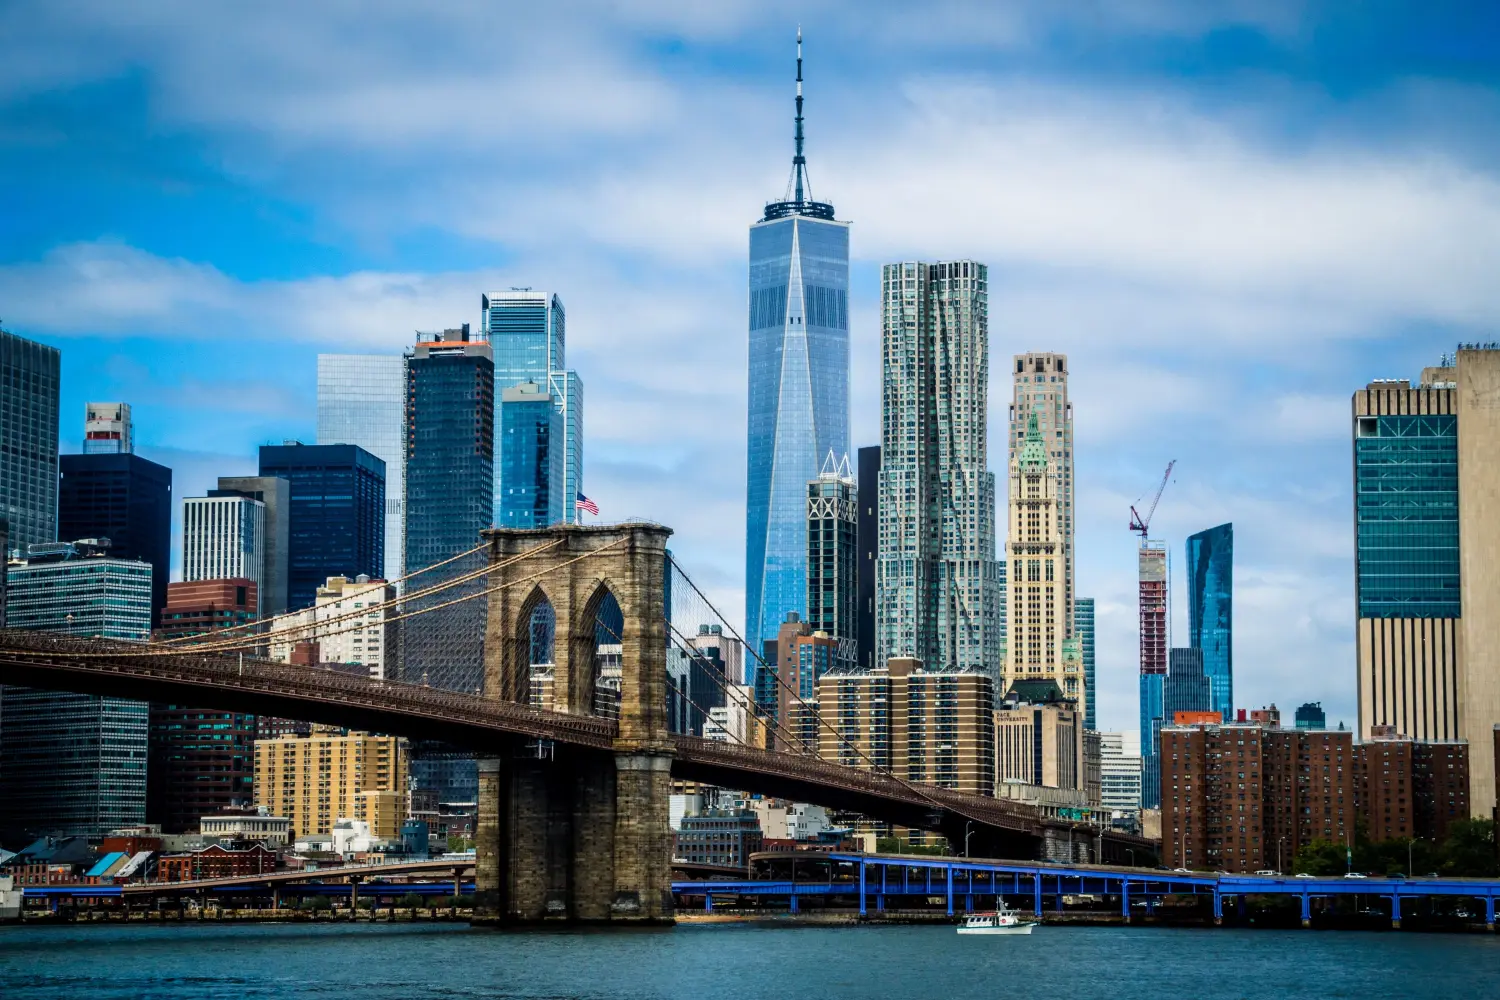 Amazing Brooklyn Bridge Photo with the One World Trade Center in The Background